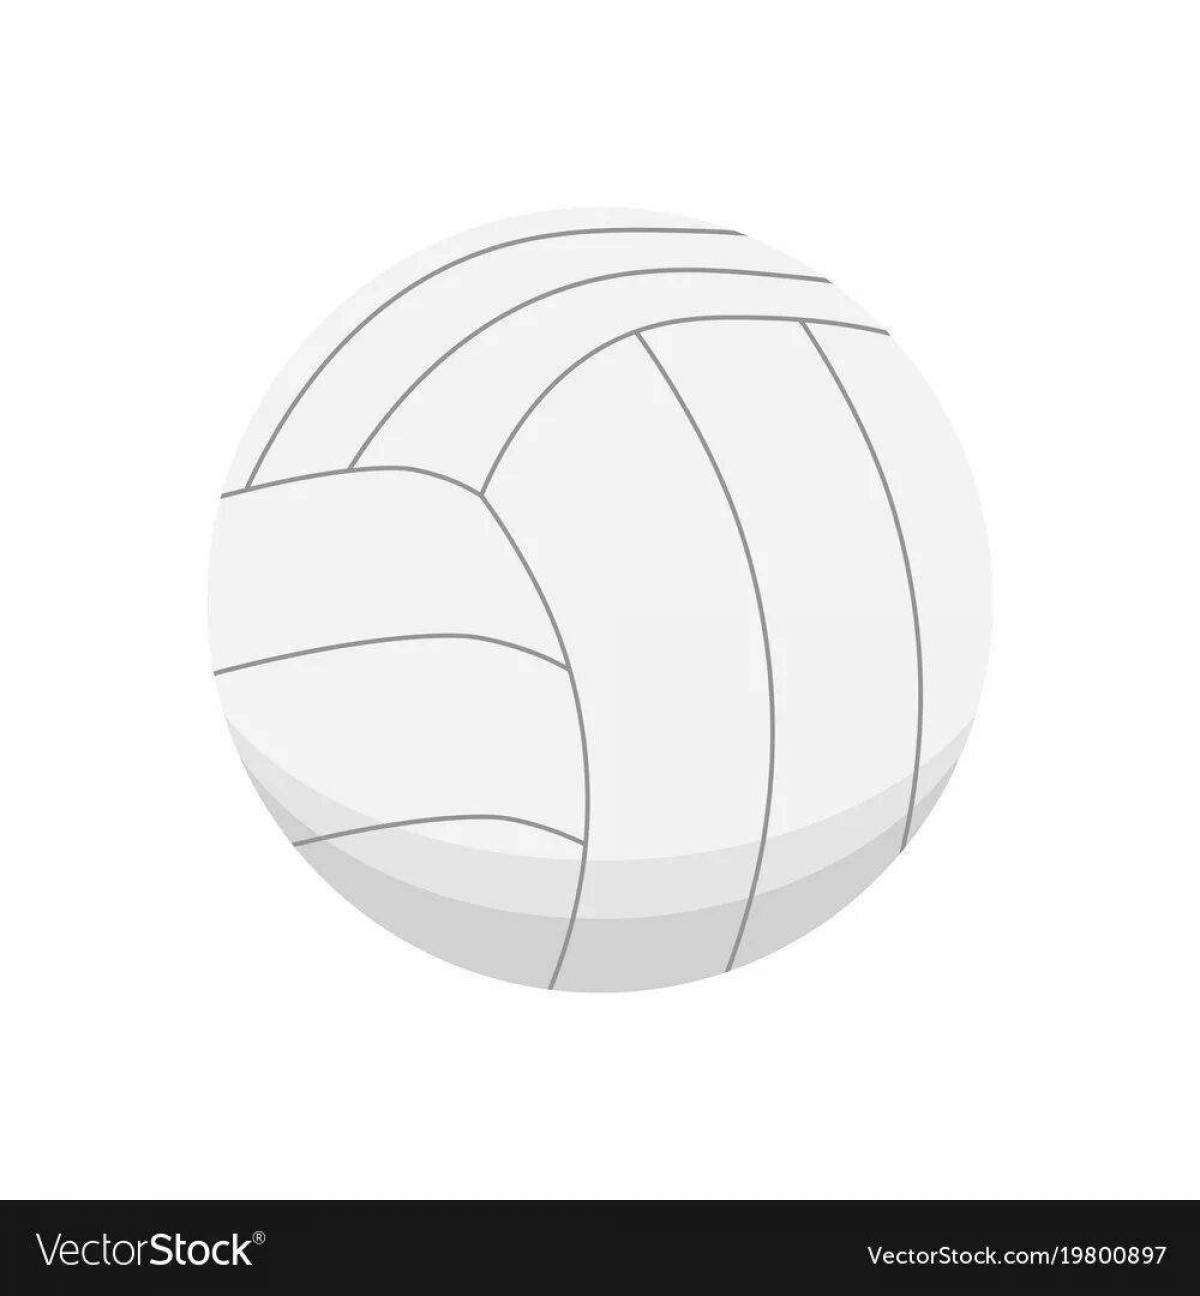 Attractive volleyball coloring book